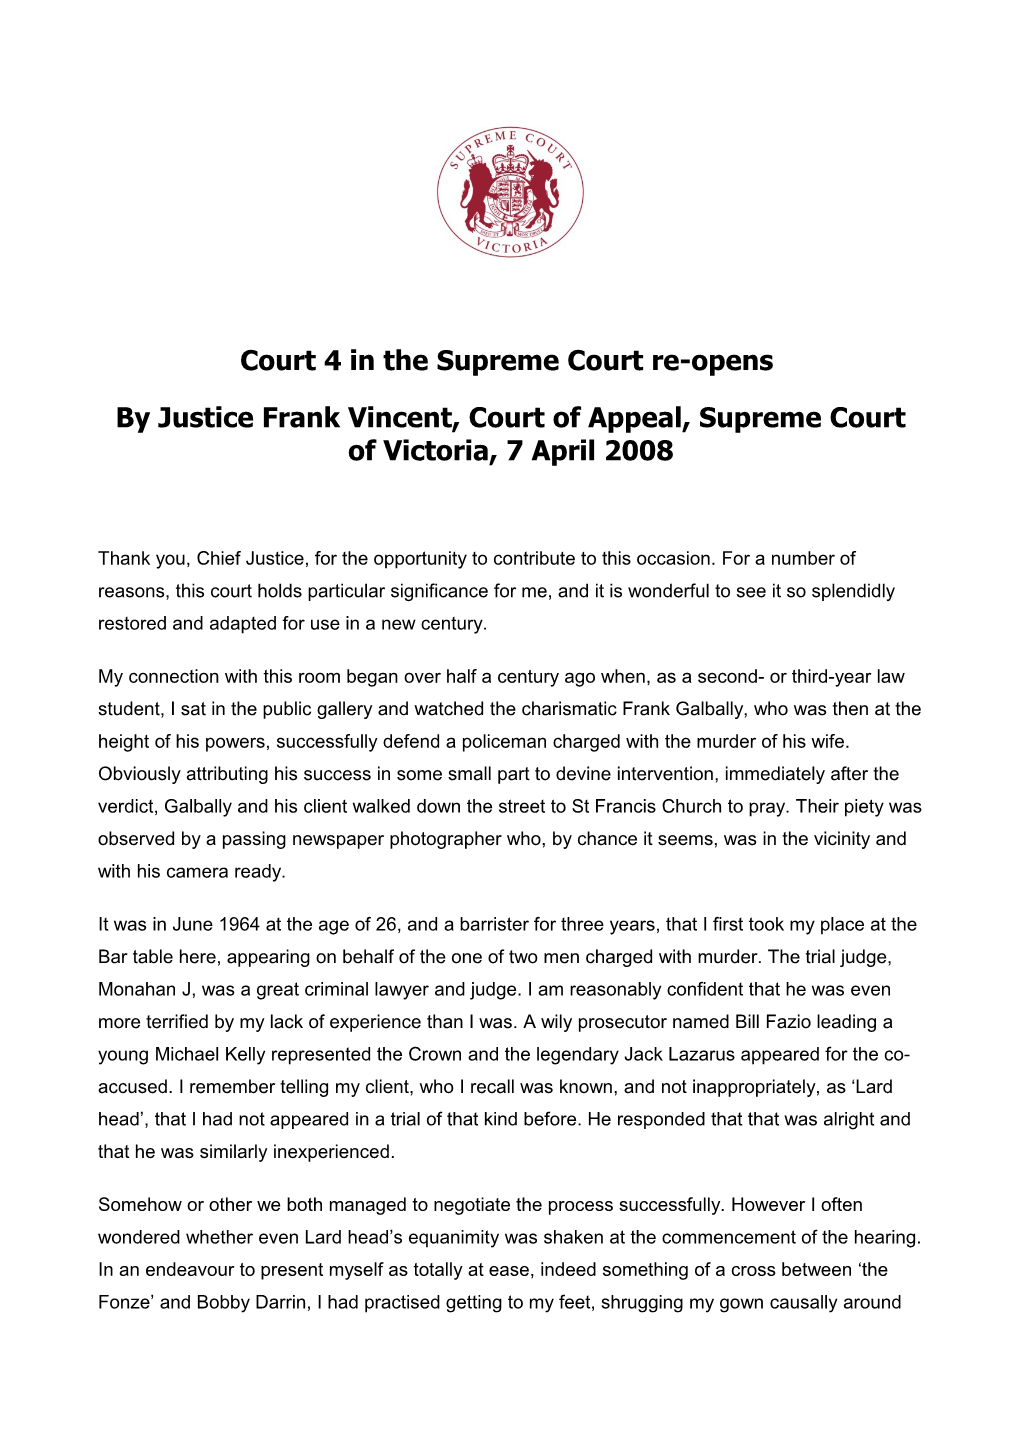 Court 4 in the Supreme Court Re-Opens